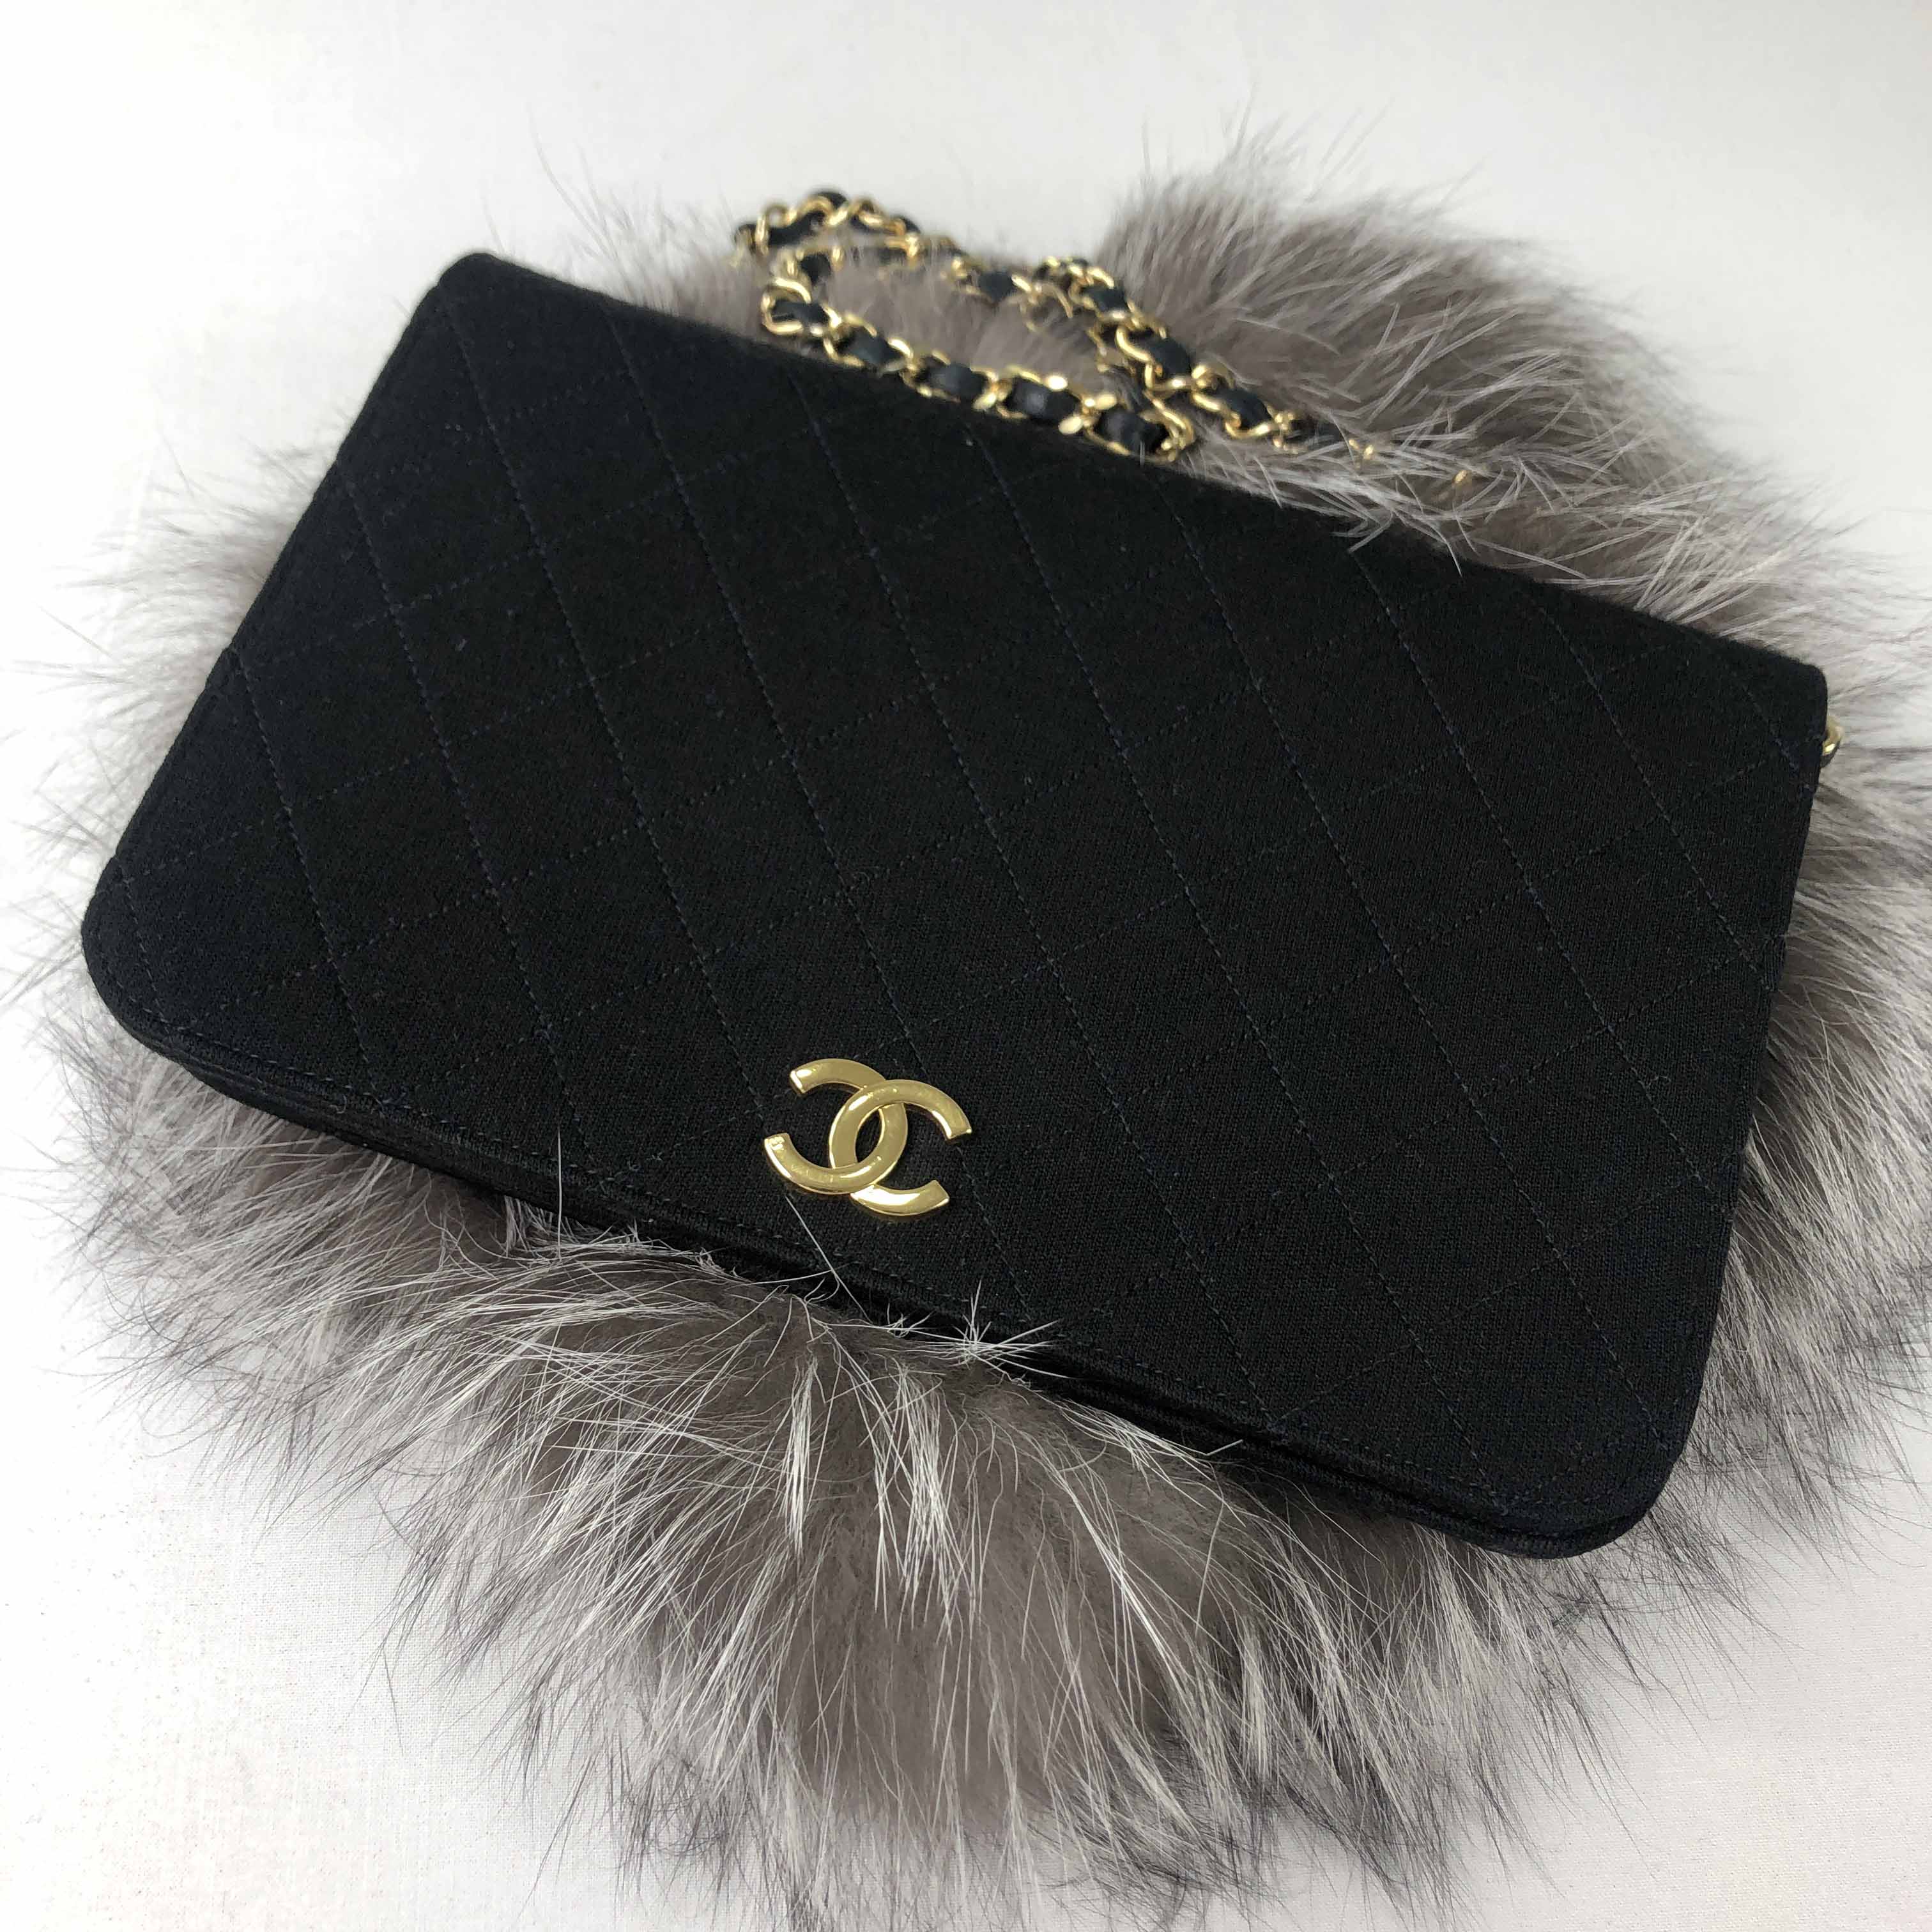 [Chanel] Fabric Clutch Bag - Size S